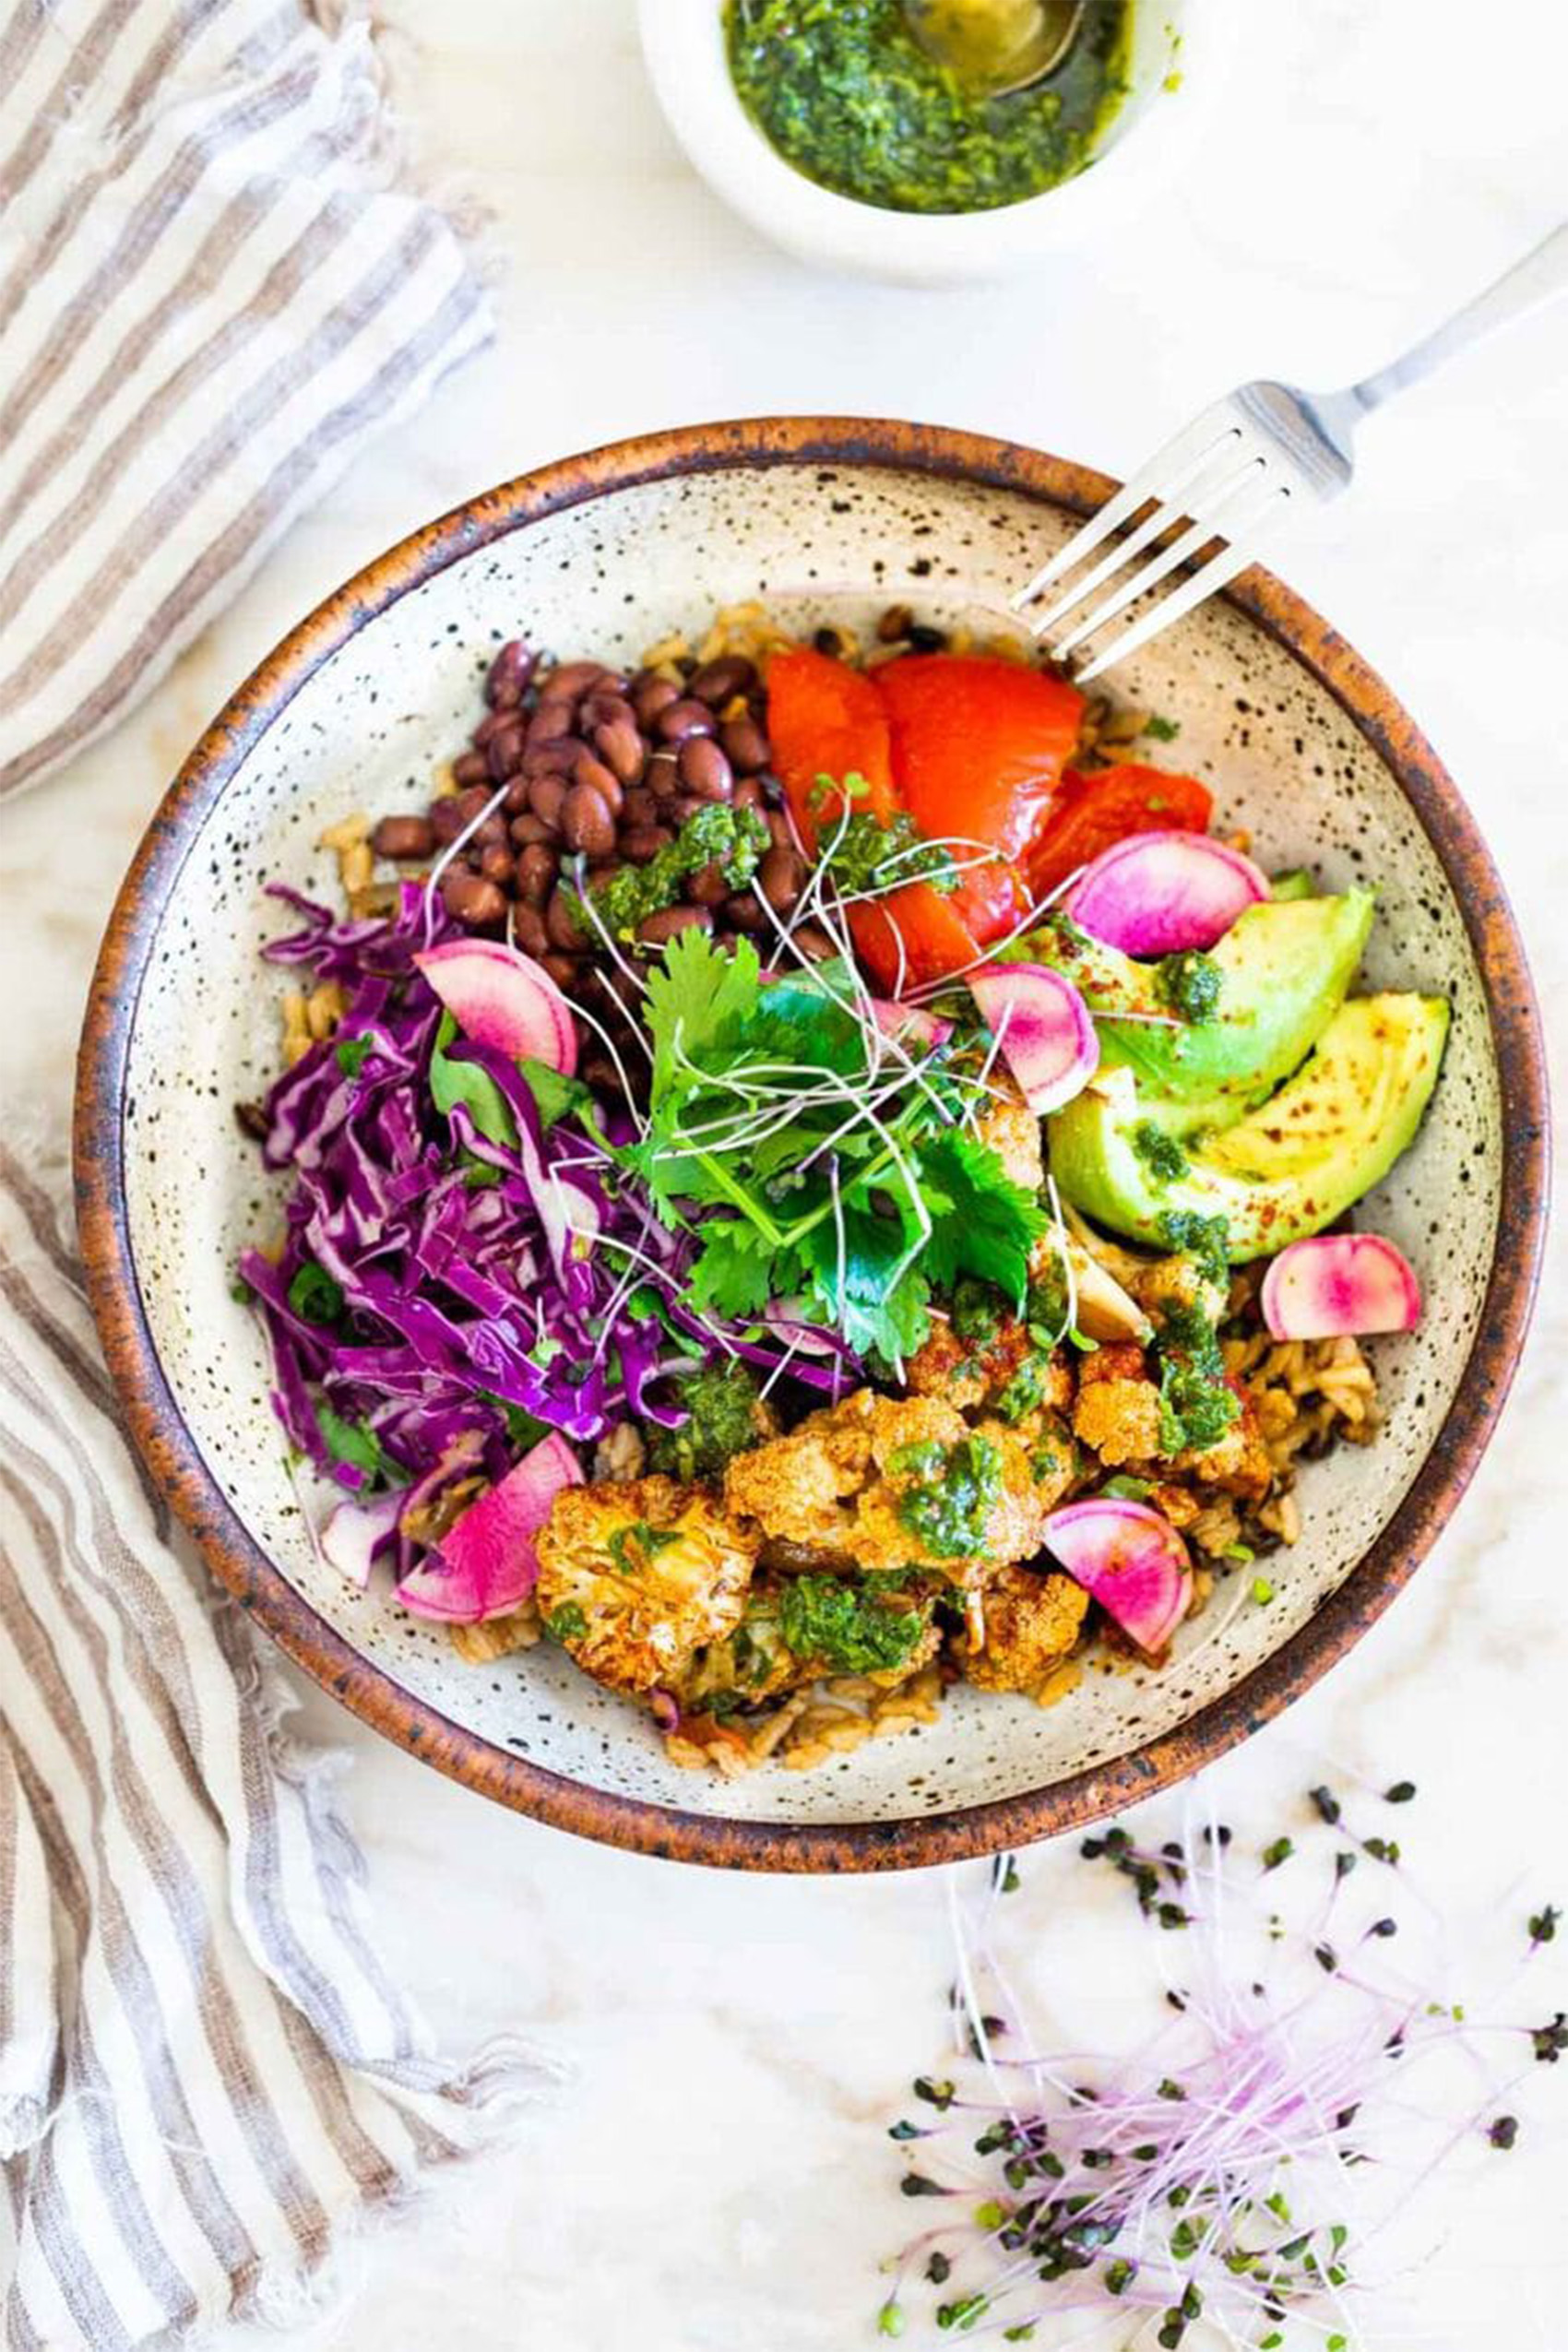 a vegan nourish bowl with black beans, cabbage, avocado, herbs and sauteed veggies